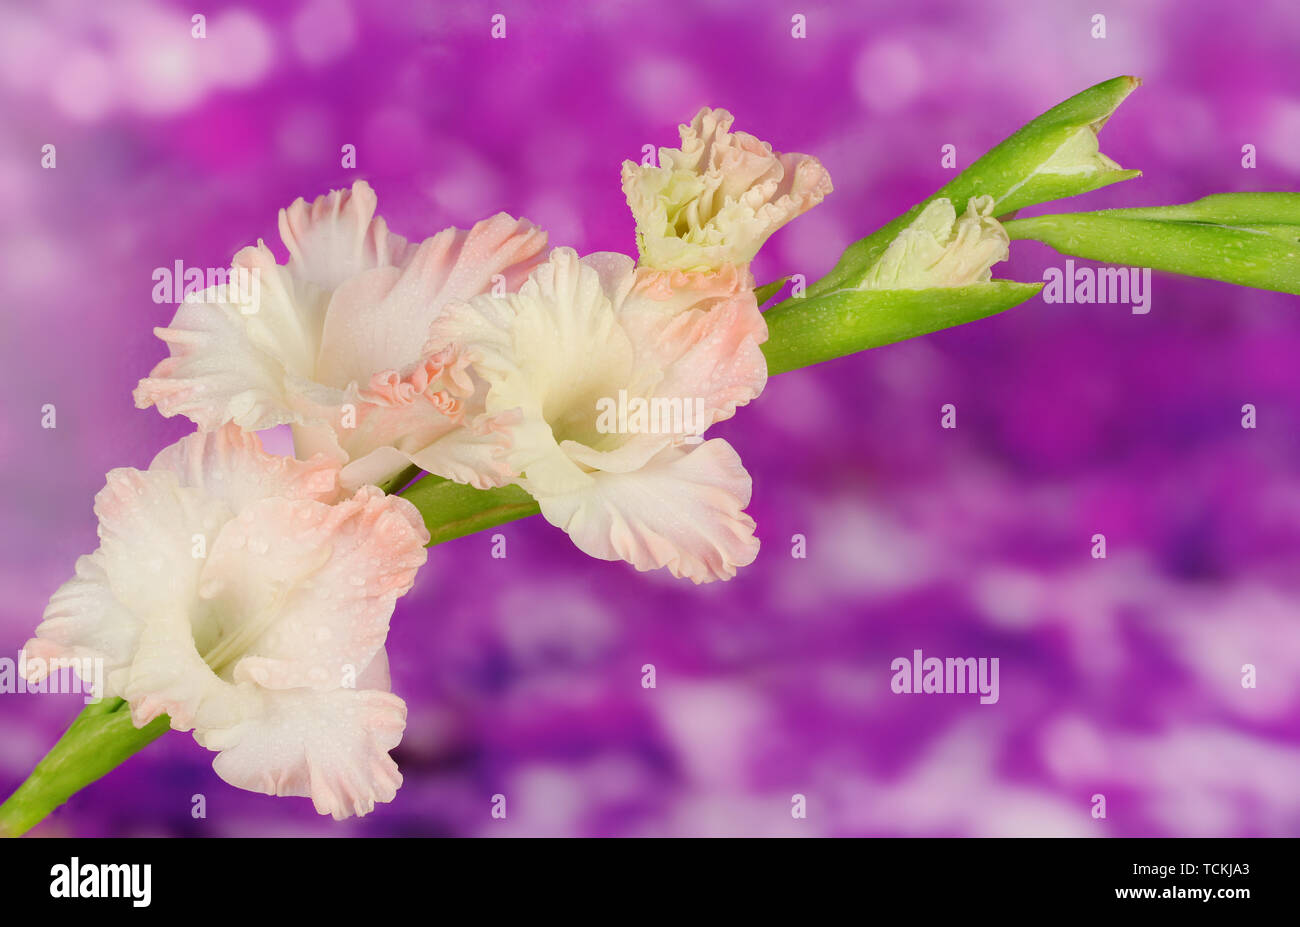 branch of pale pink gladiolus on purple background close-up Stock Photo